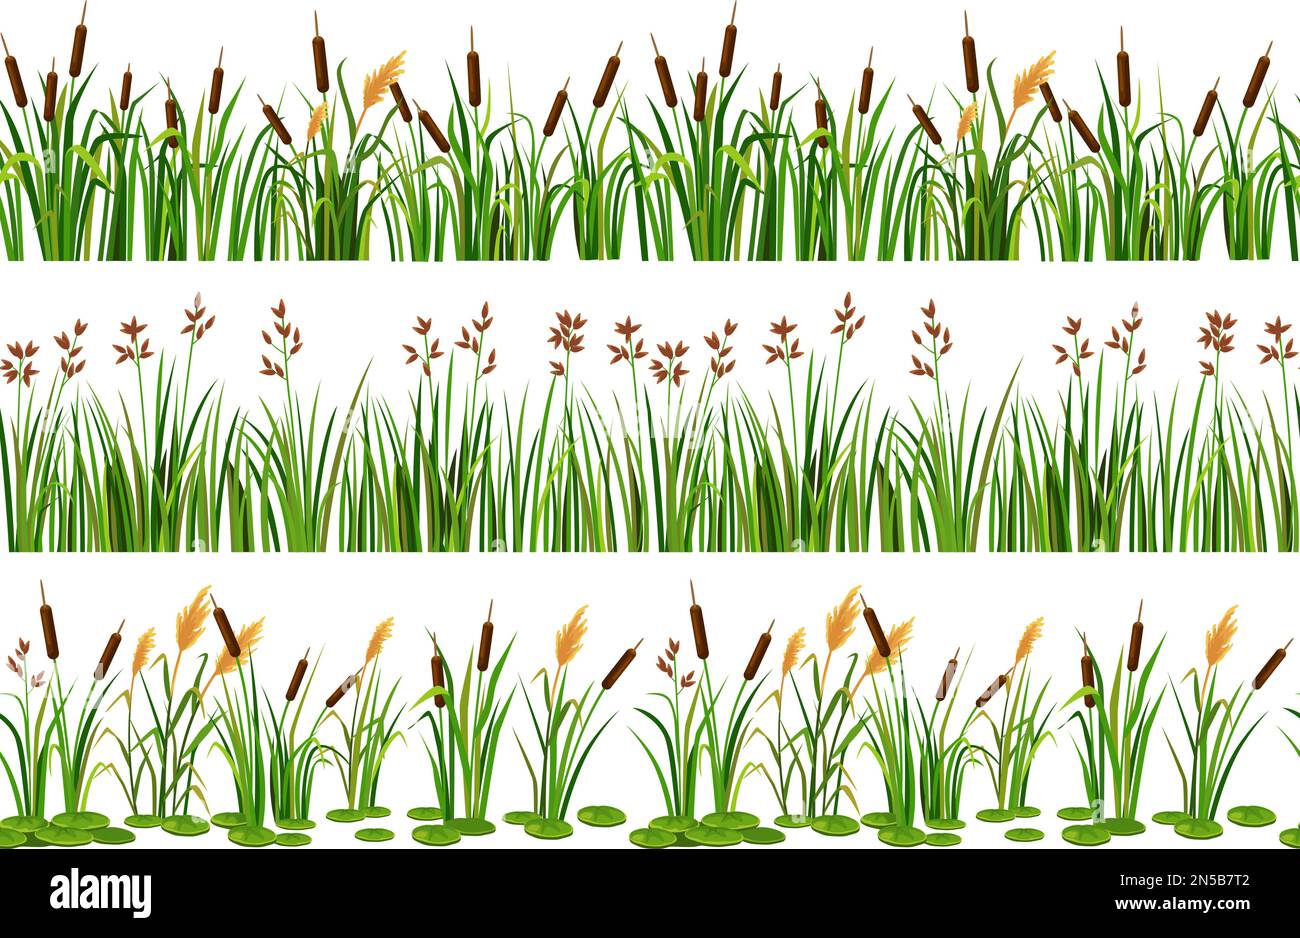 Lake aquatic plant borders. Seamless swamp cattails, marsh reed and strip of coastal river plants vector illustration set Stock Vector